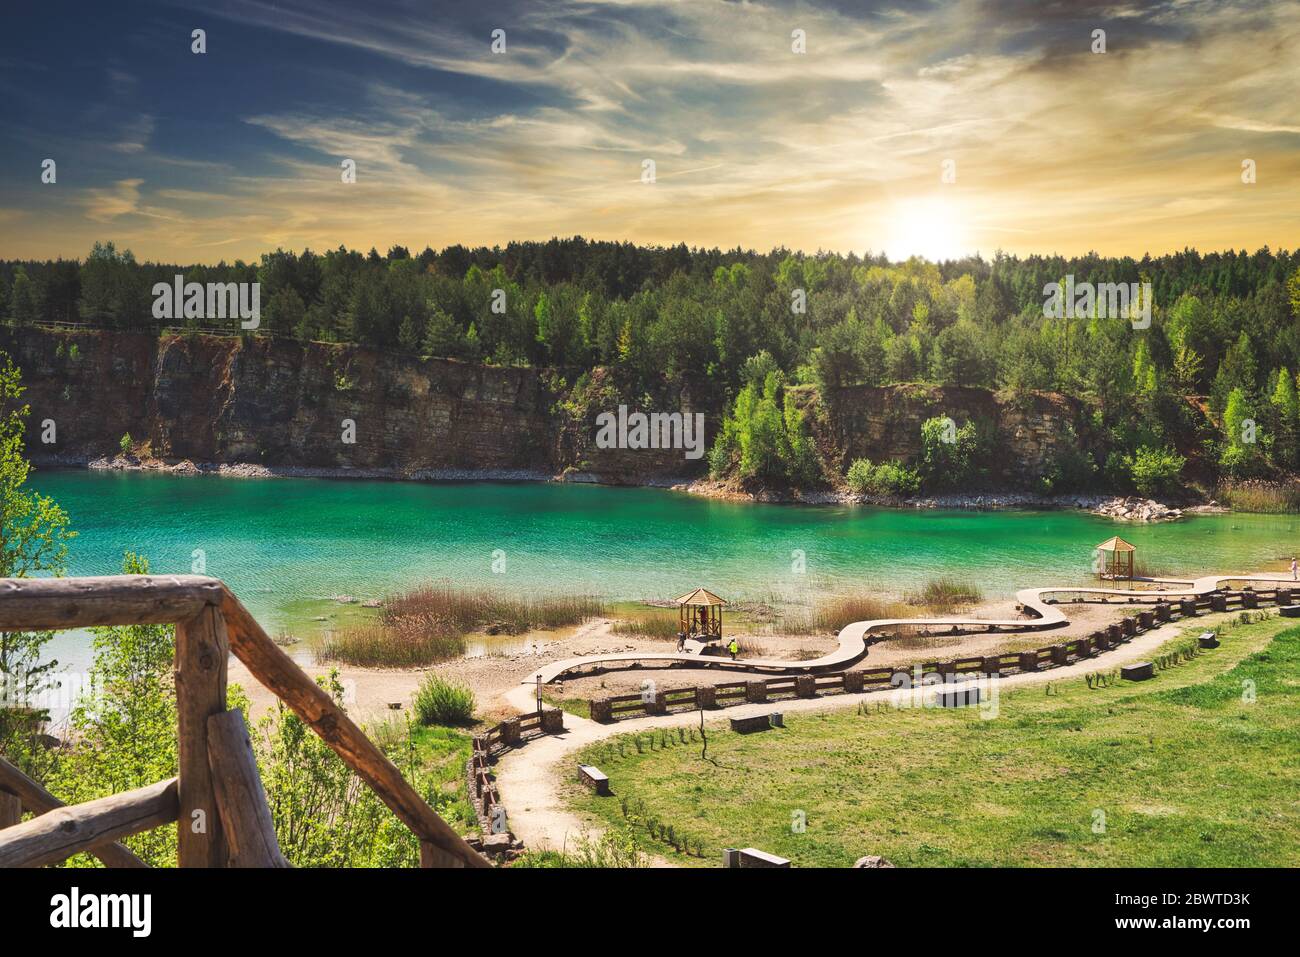 Azure lake. The concept of landscape and relaxing in the fresh air. Trukus water reservoir, attraction and a beautiful place to spend free time. Beaut Stock Photo